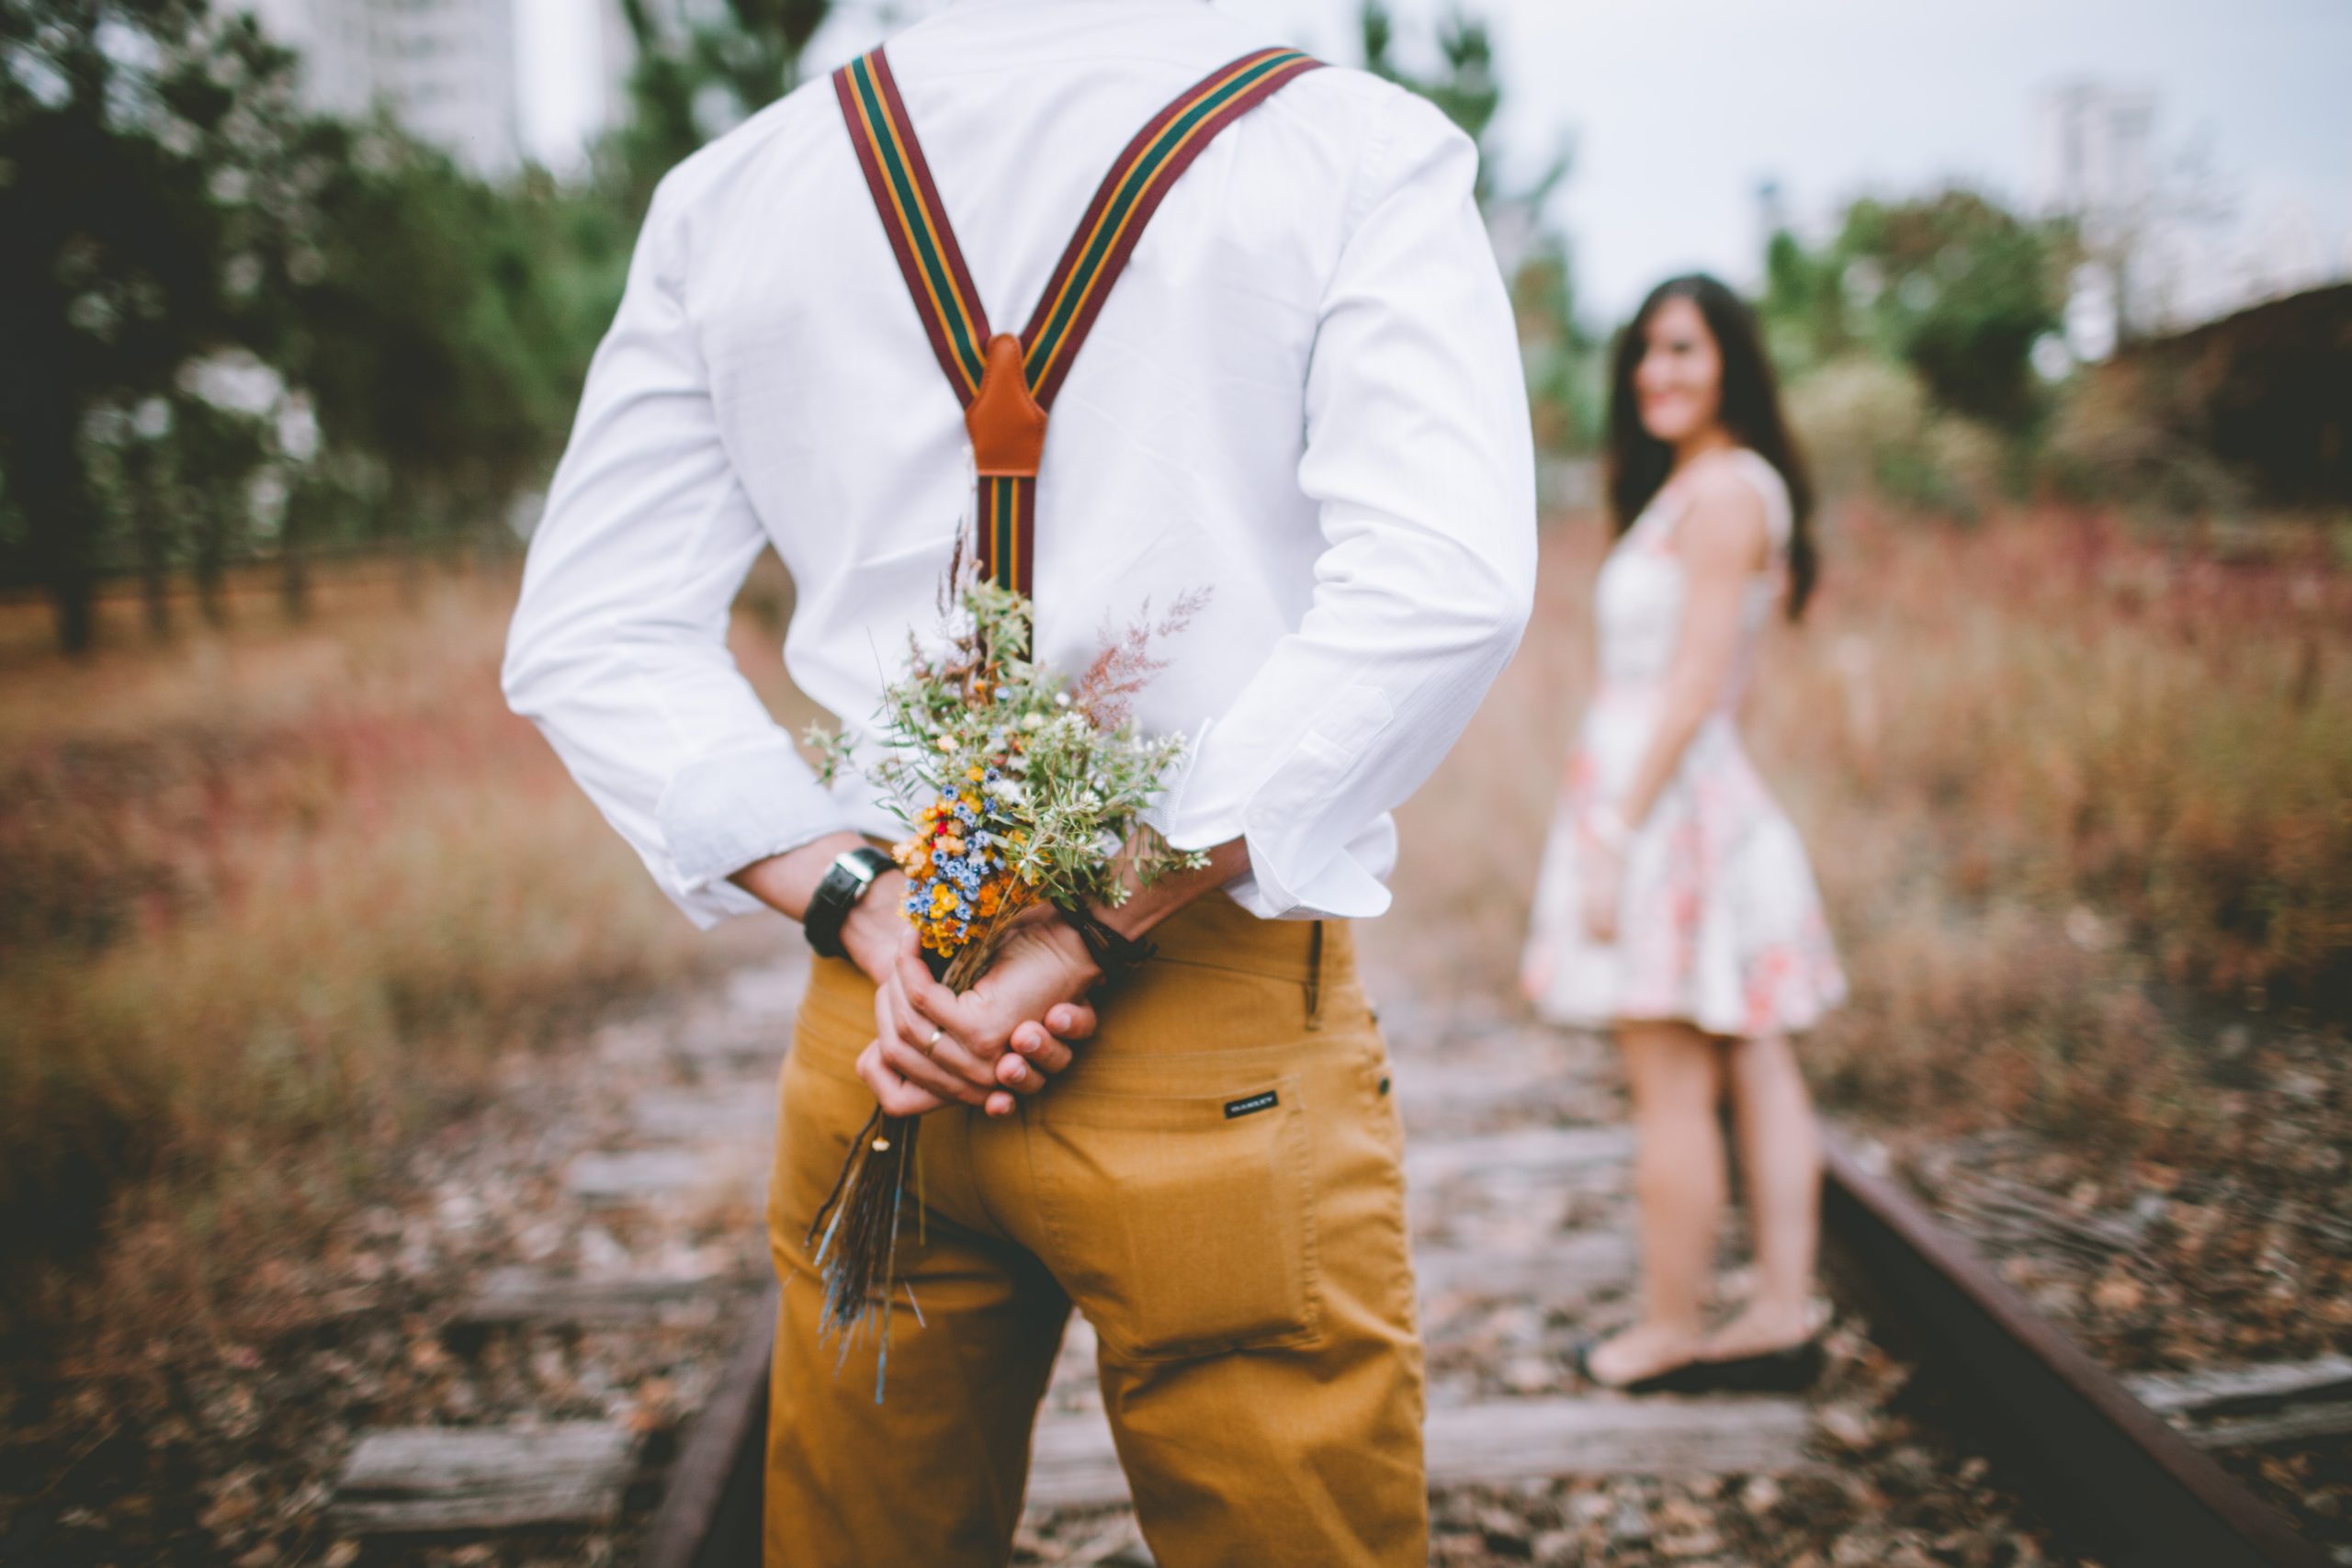 Man with bouquet in hands behind his back in front of woman